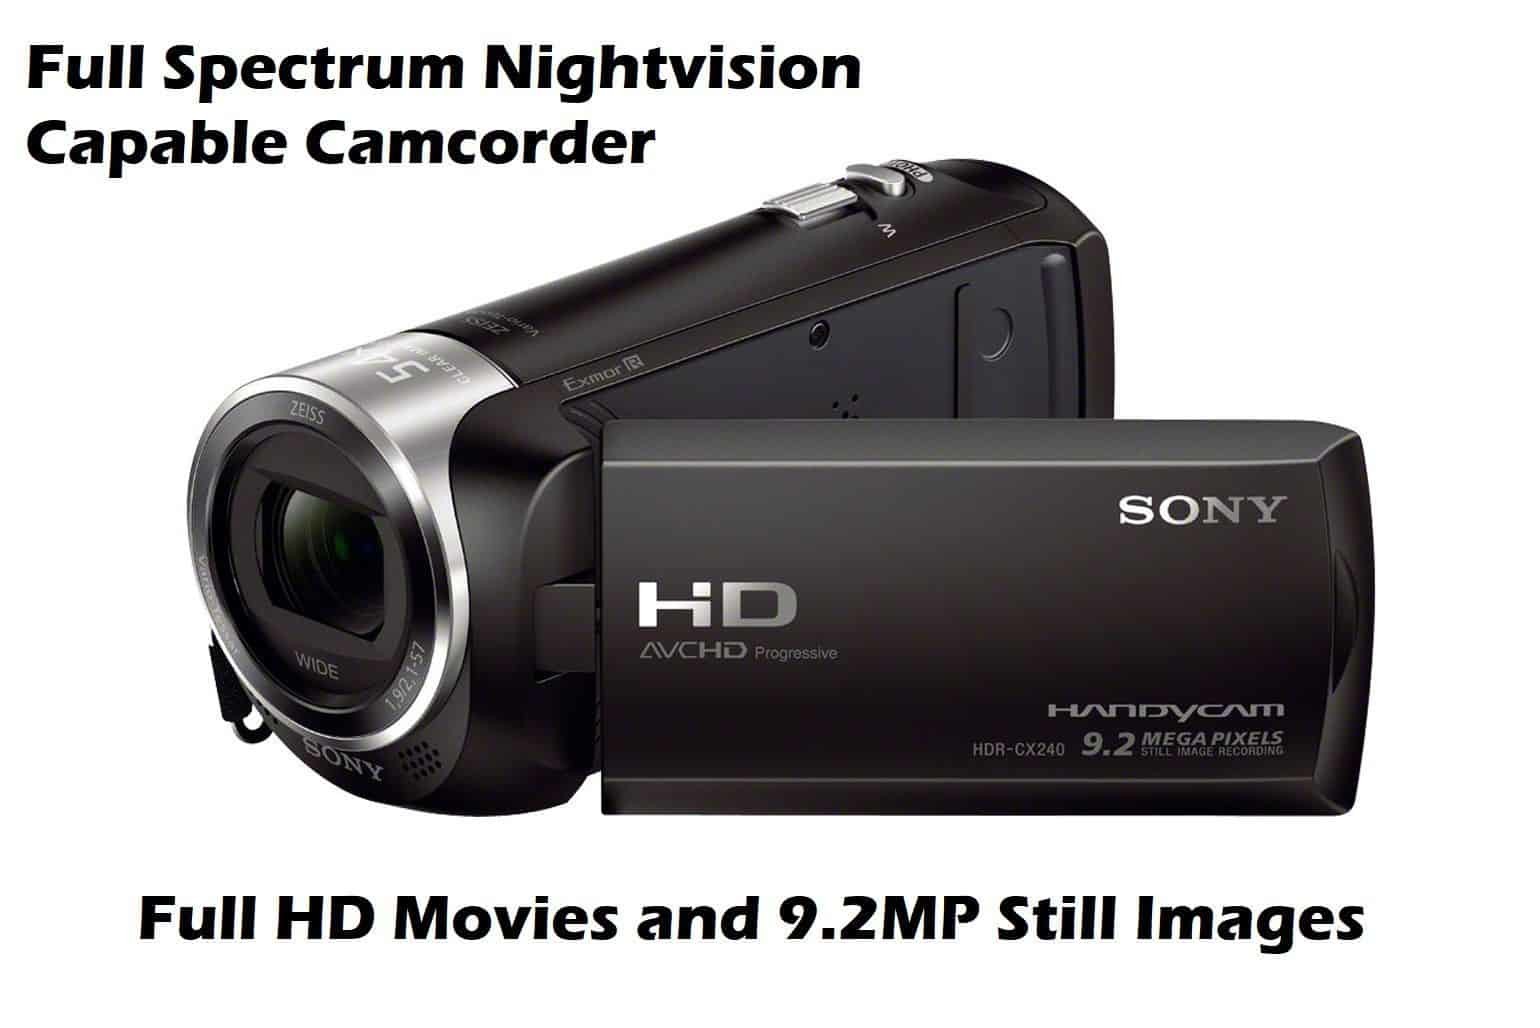 art downs recommends sony camcorder night vision pic